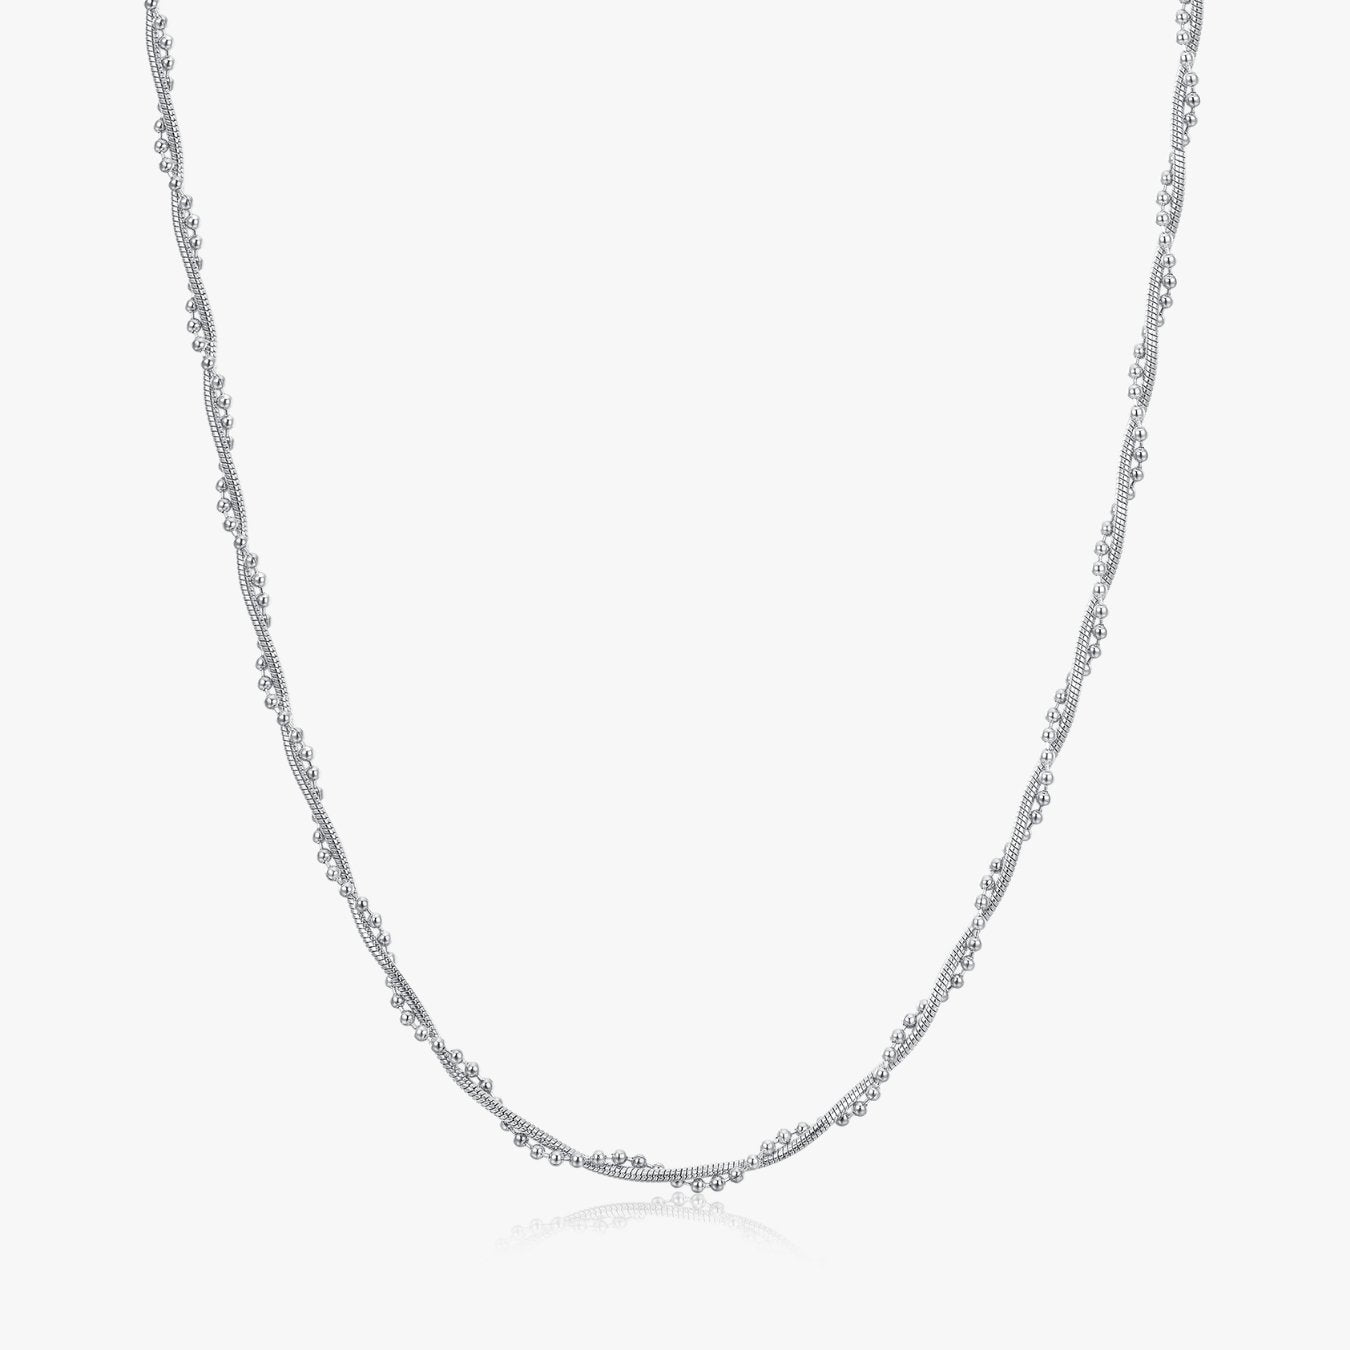 Bella Twisted Necklace in Silver - Flaire & Co.